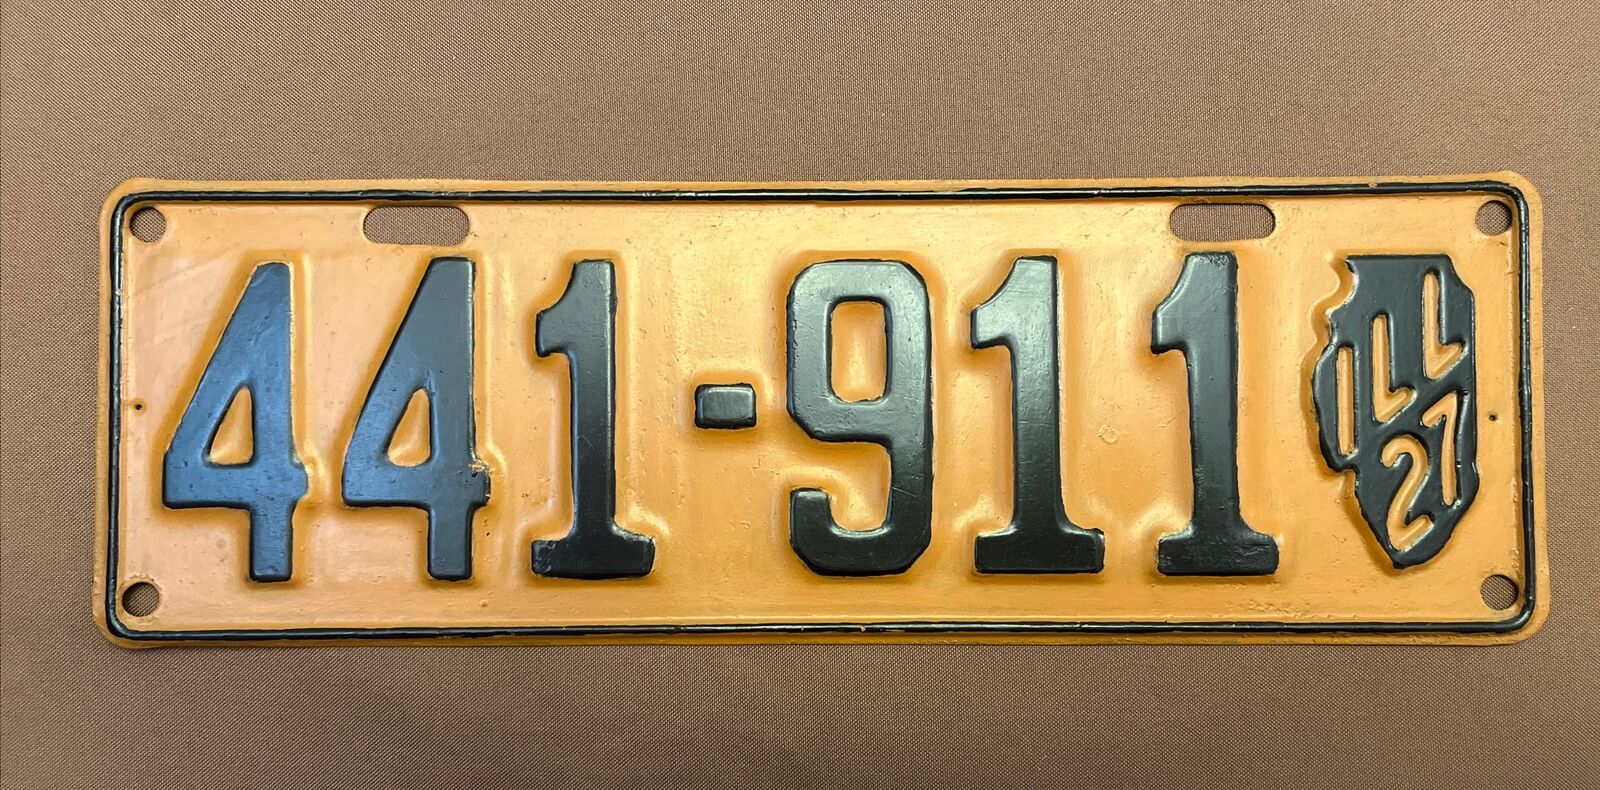 Vintage 1927 ILL License Plate 441-911 Great Condition and Beautiful Paint